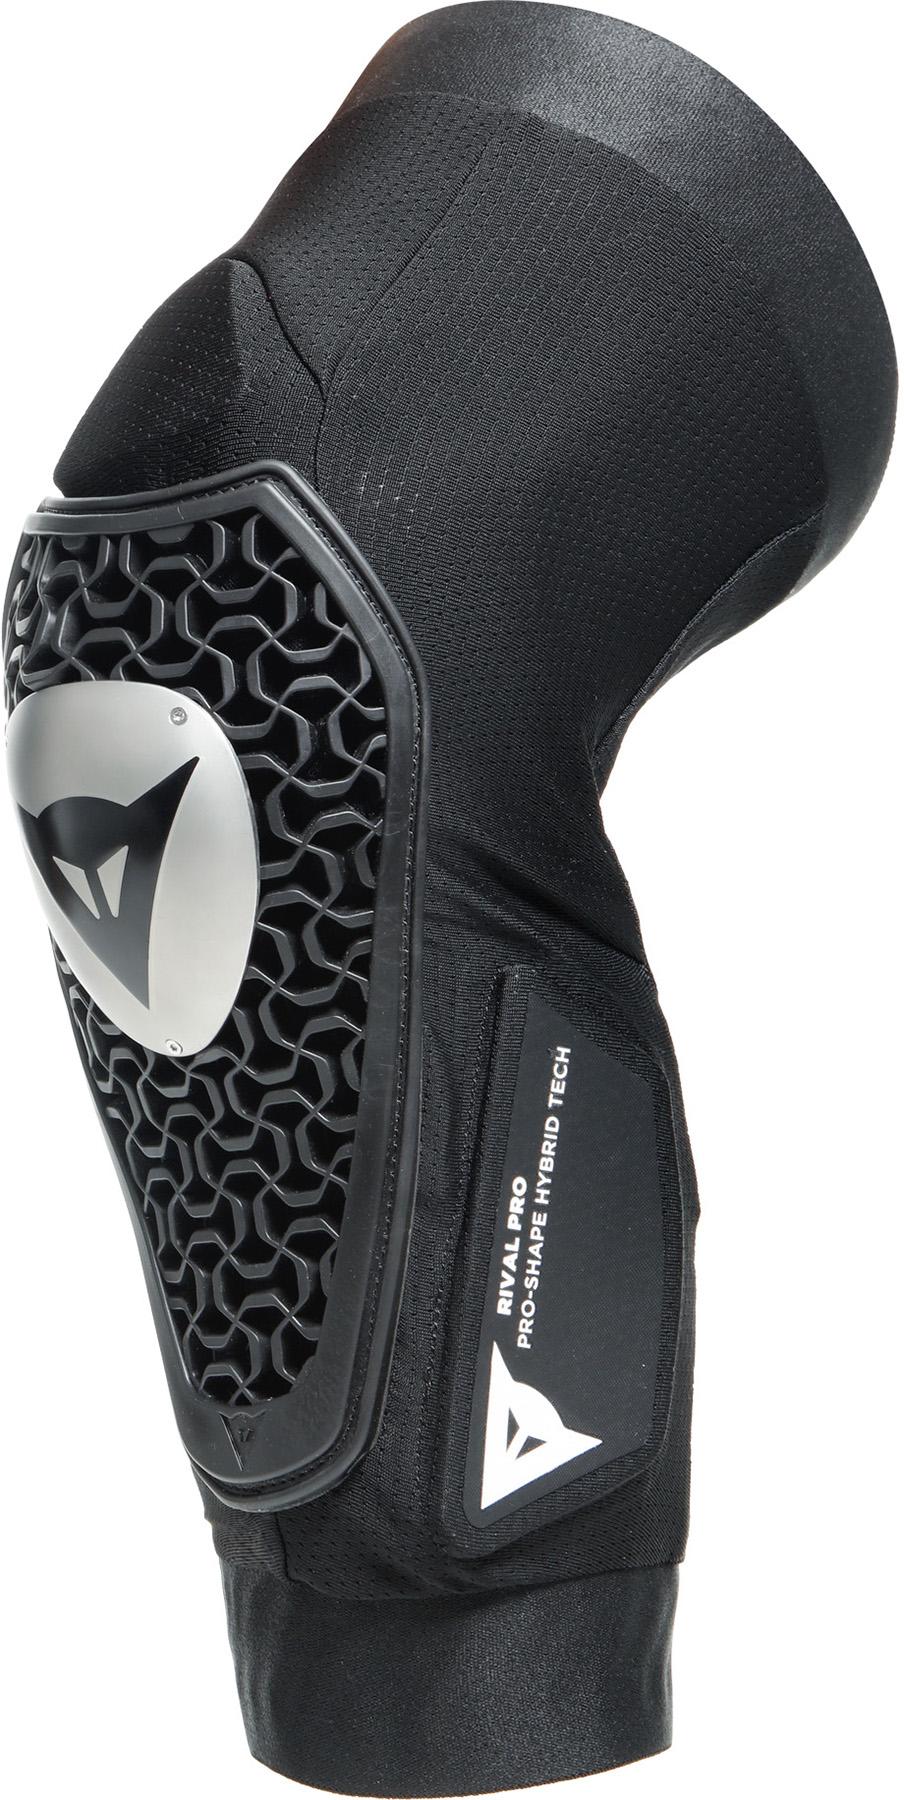 Dainese Rival Pro Knee Guard  Black